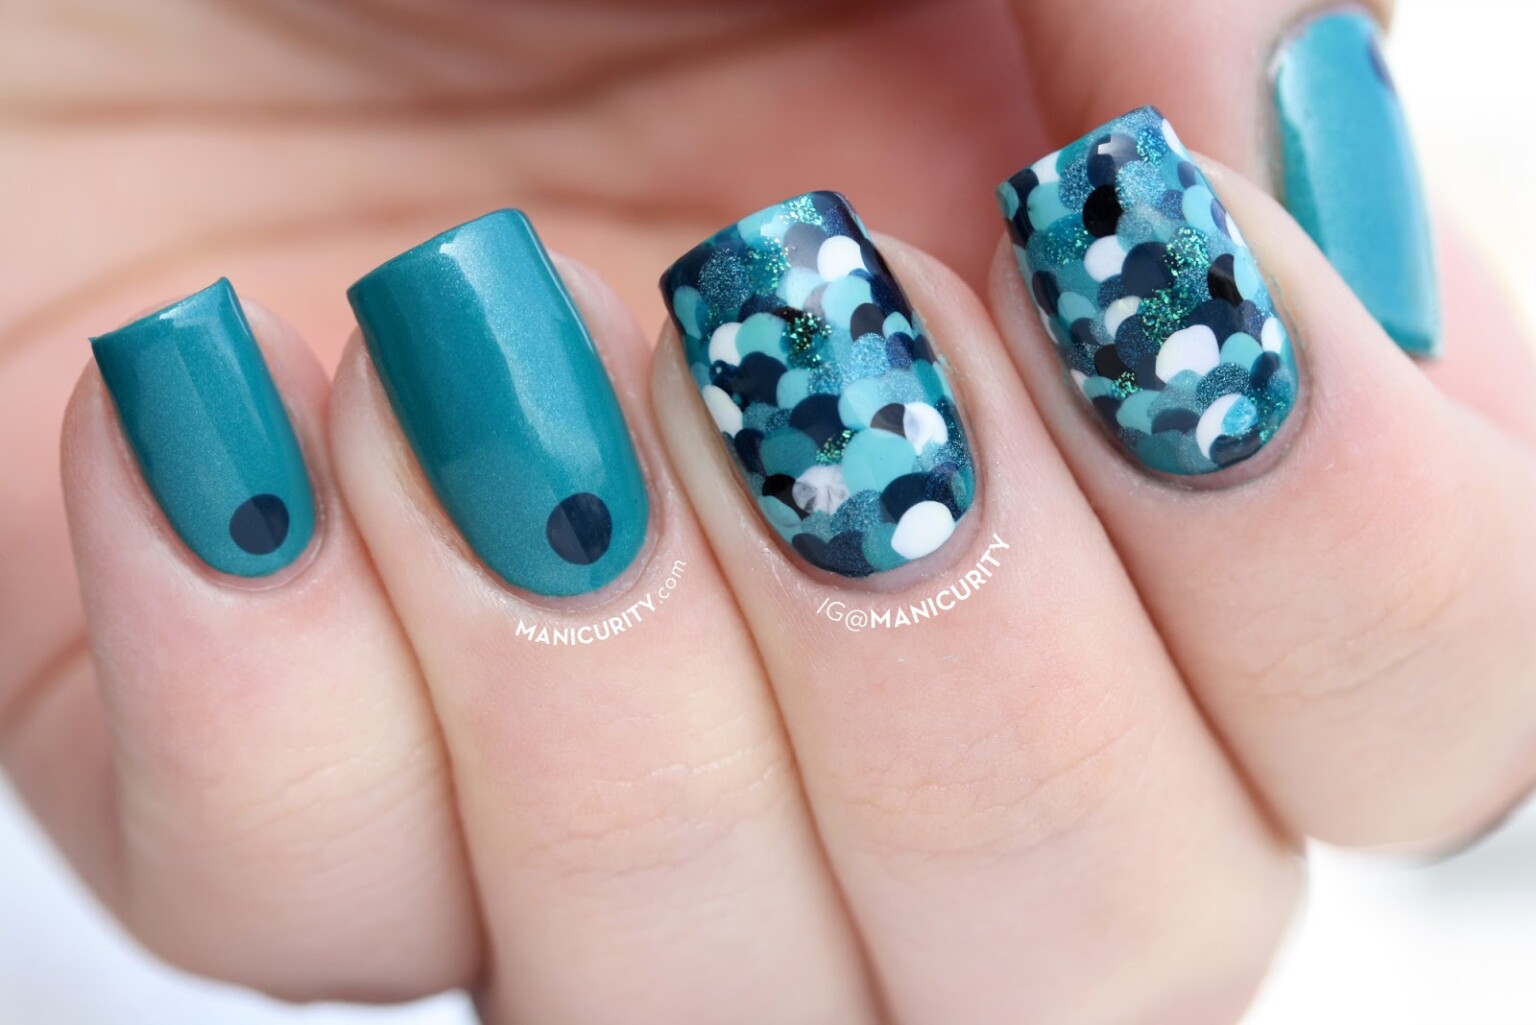 3. Creative Nail Art Designs to Try - wide 4